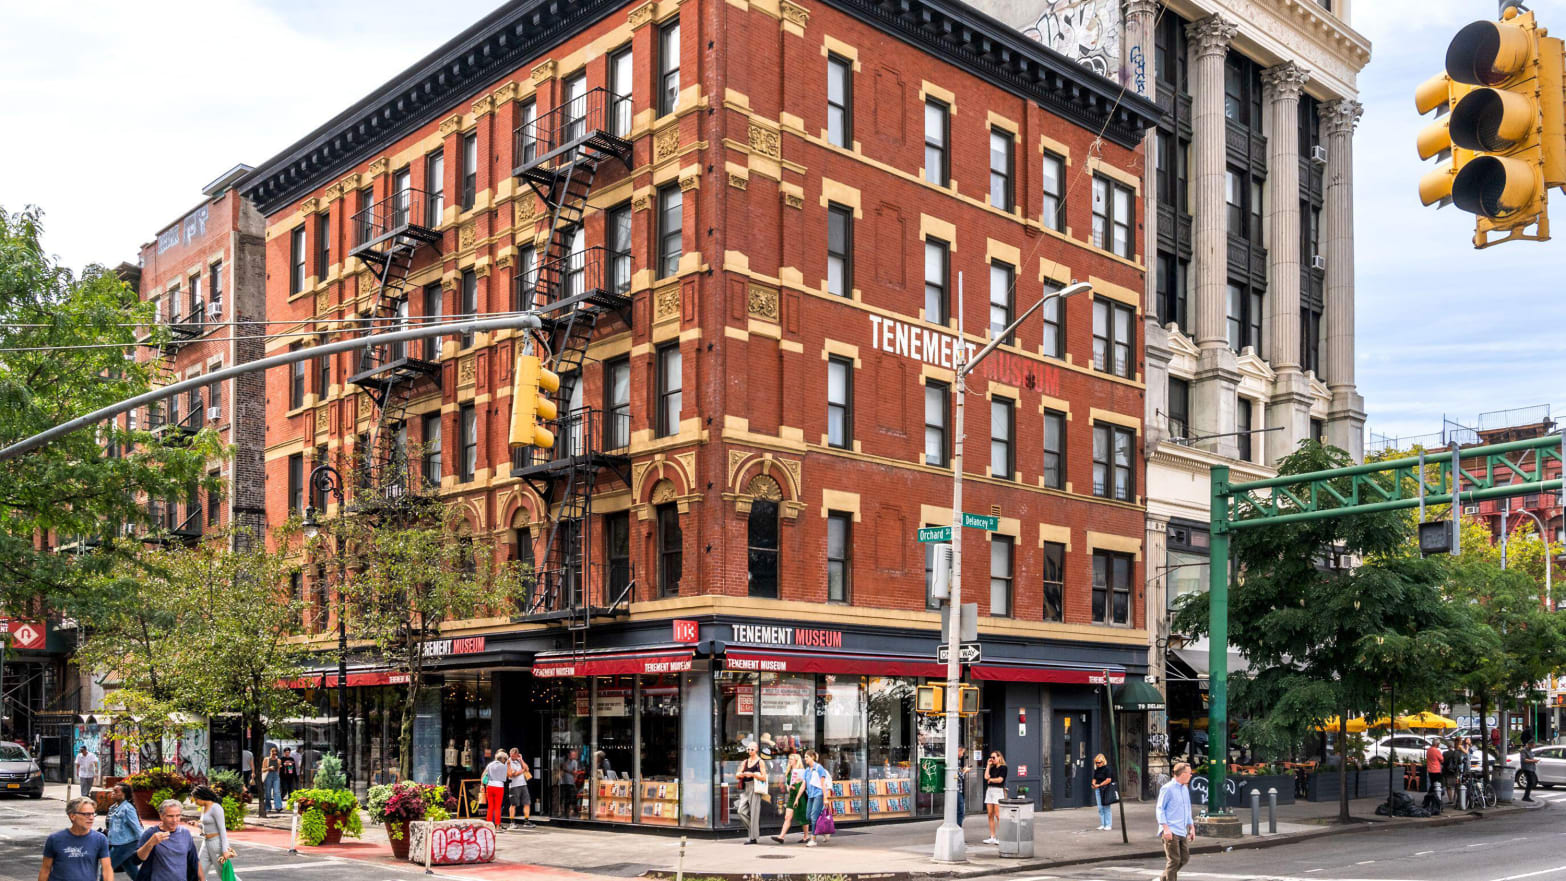 The Lower East Side Tenement Museum